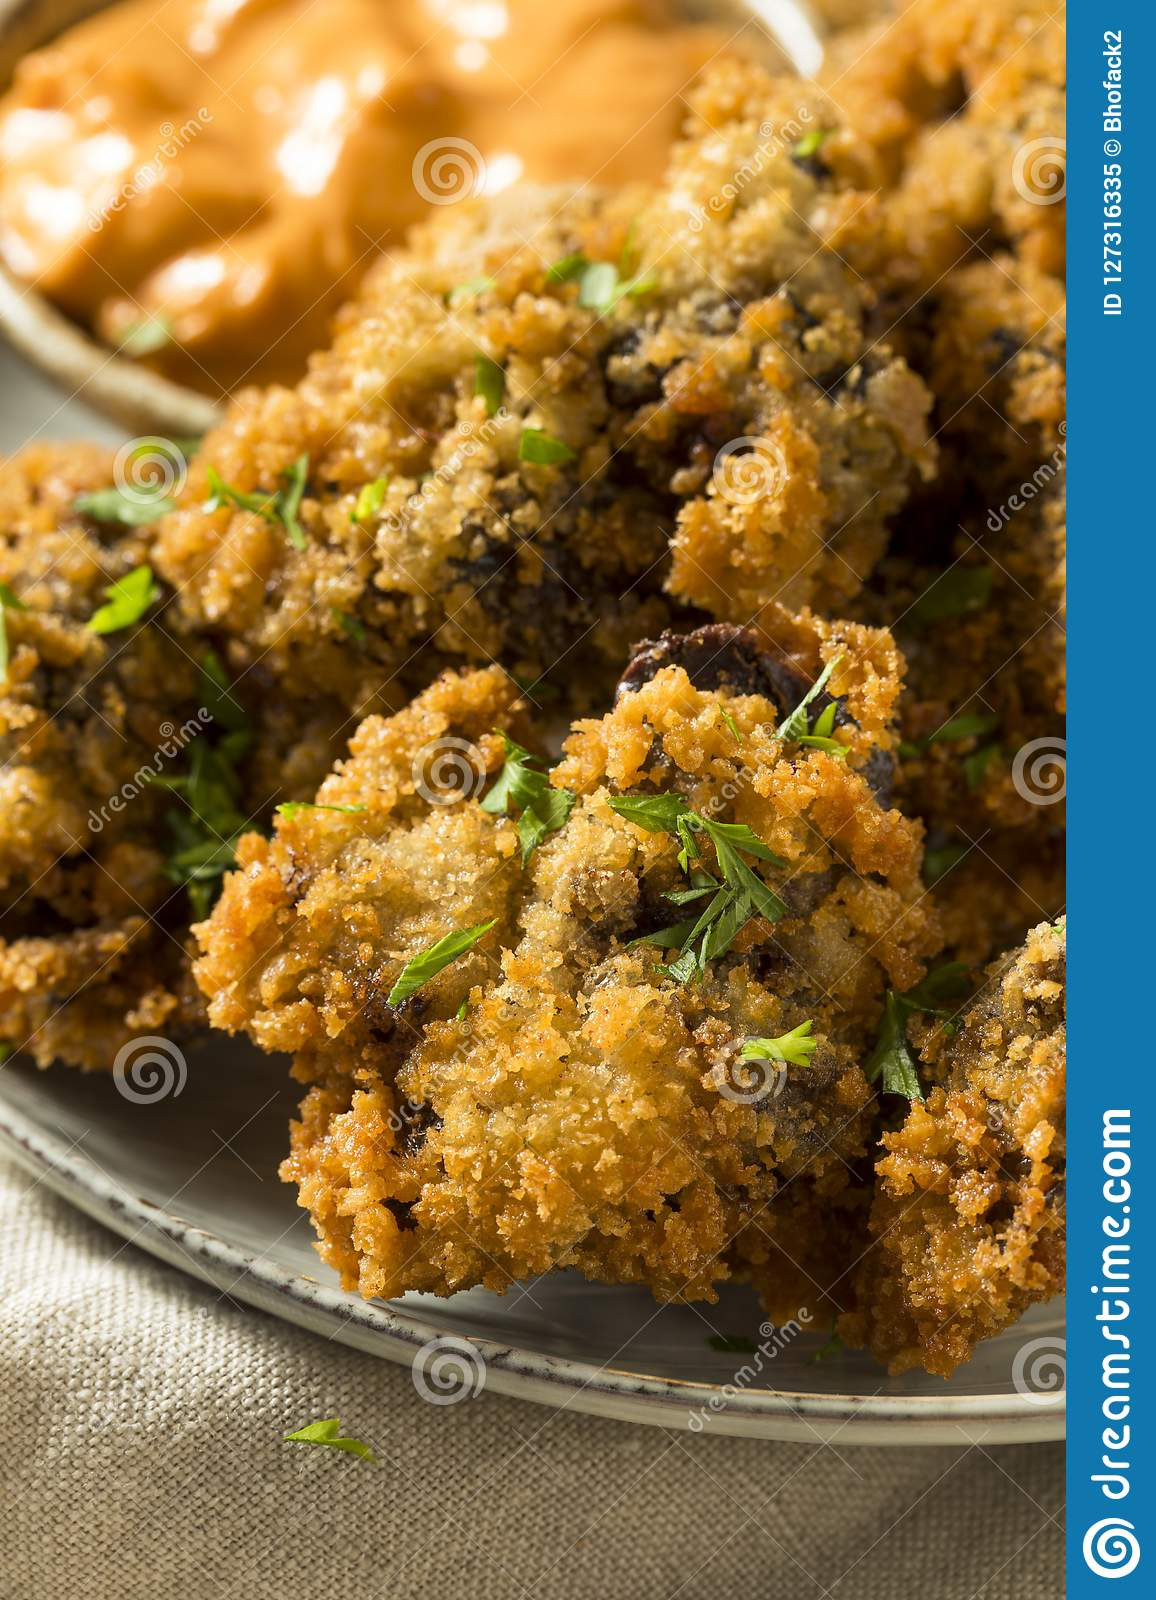 Deep Fried Chicken Livers
 Homemade Deep Fried Chicken Livers Stock Image Image of